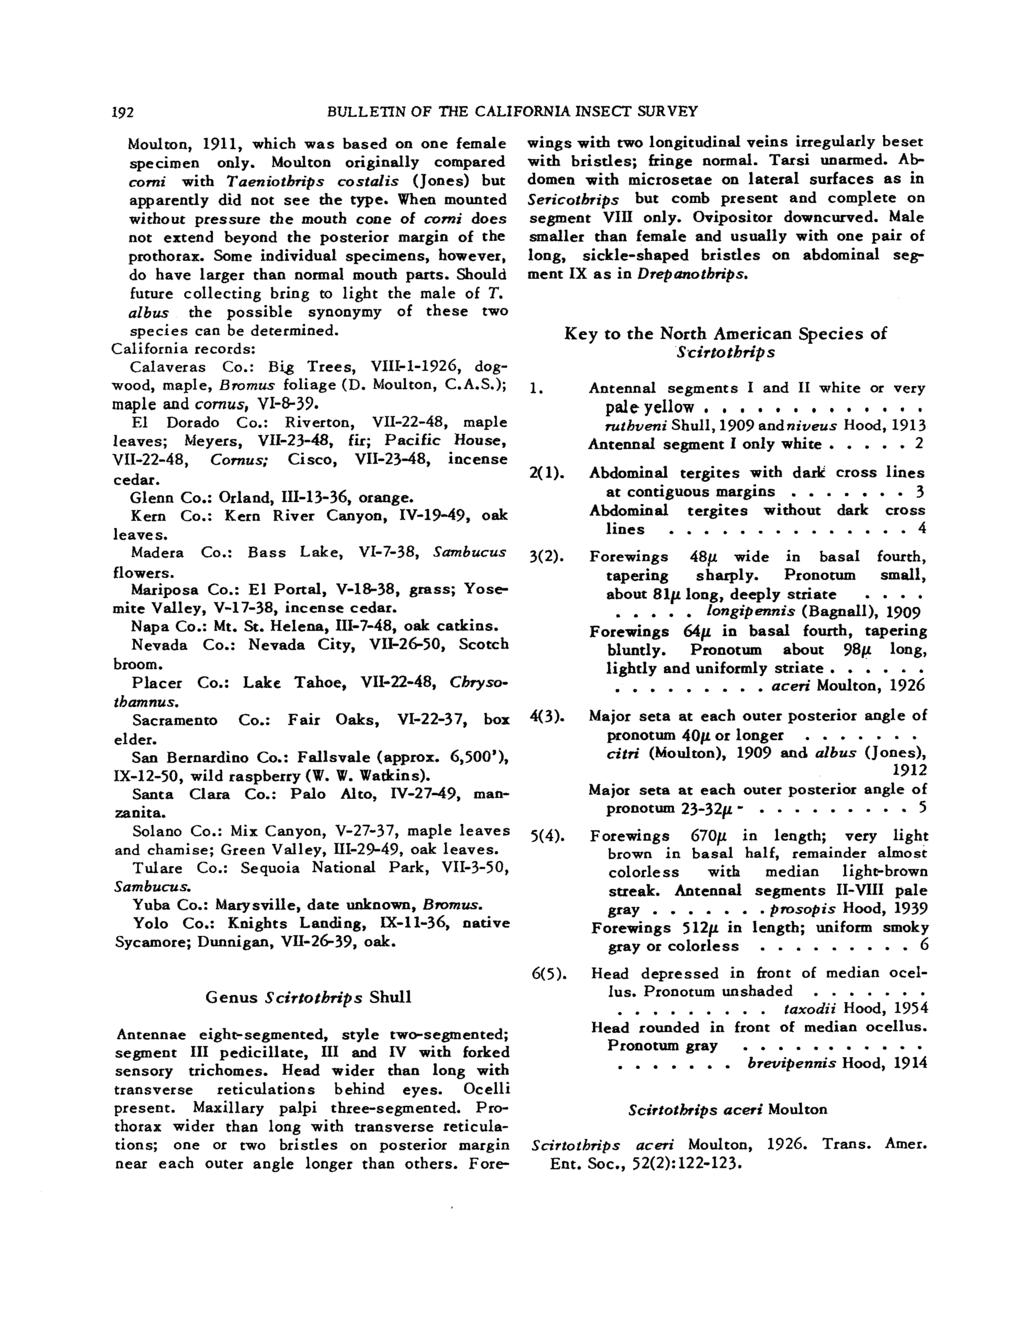 192 BULLETIN OF THE CALIFORNIA INSECT SURVEY Moulton, 1911, which was based on one female specimen only.